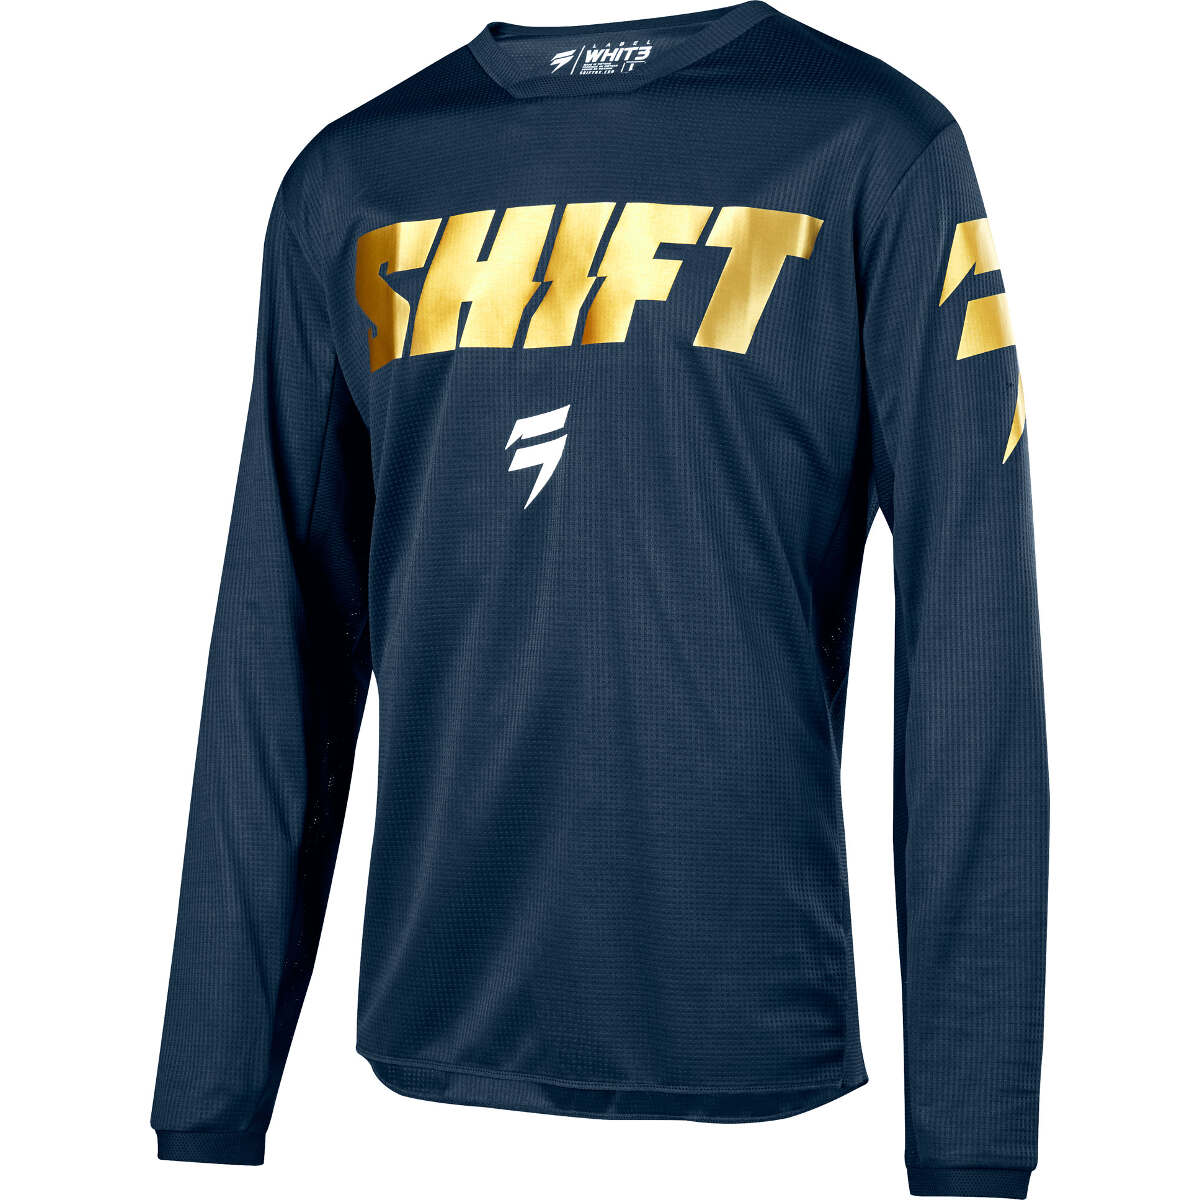 Shift Maillot MX Whit3 Label Navy/Gold - Limited Edition